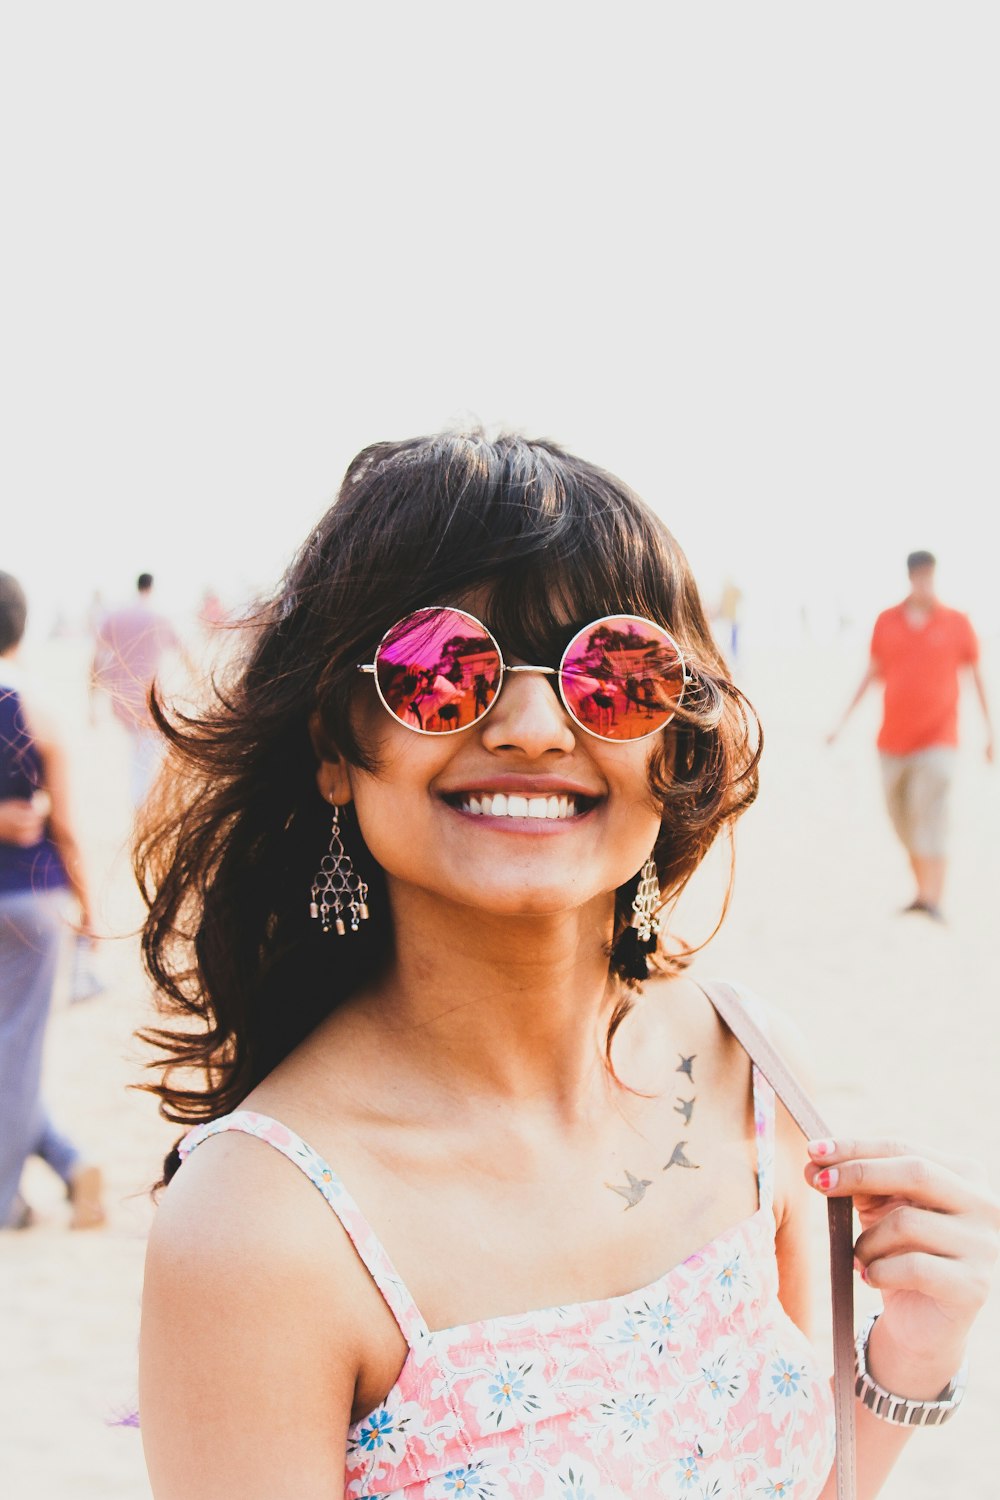 a woman wearing sunglasses and smiling at the camera